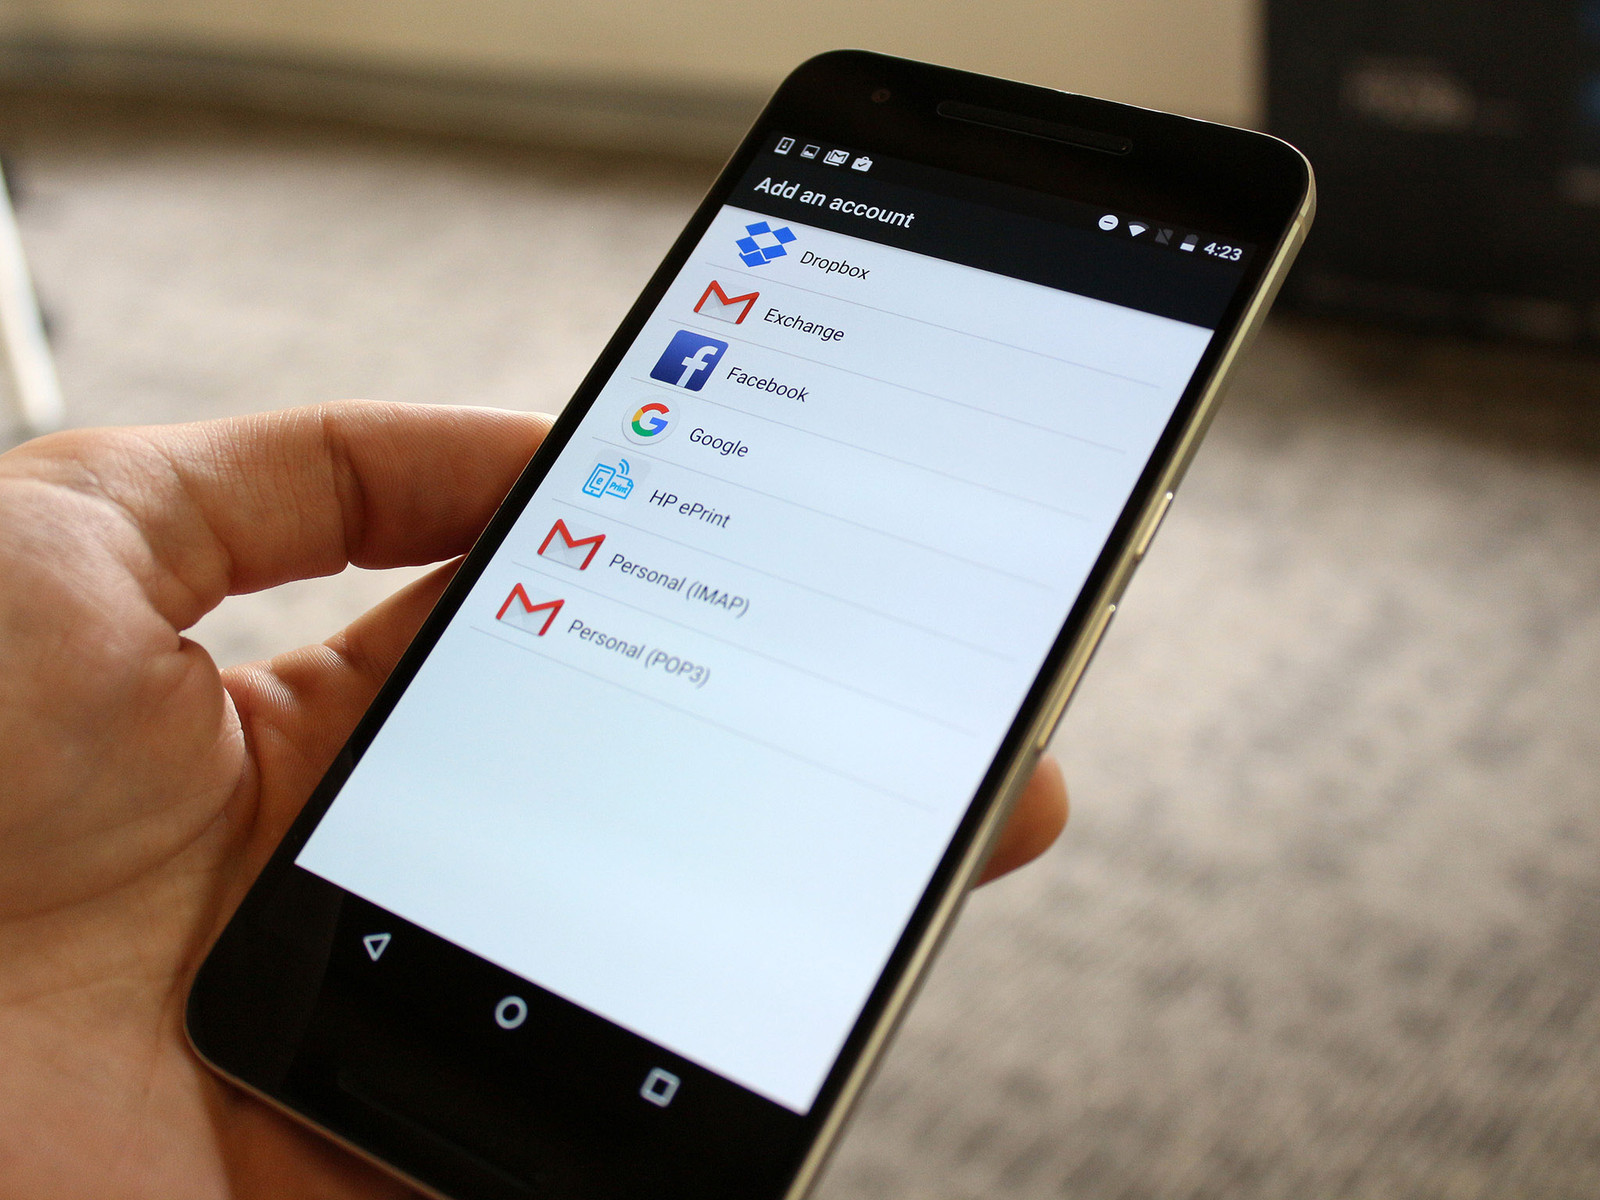 Steps to Add Second Google Account to Android Phone